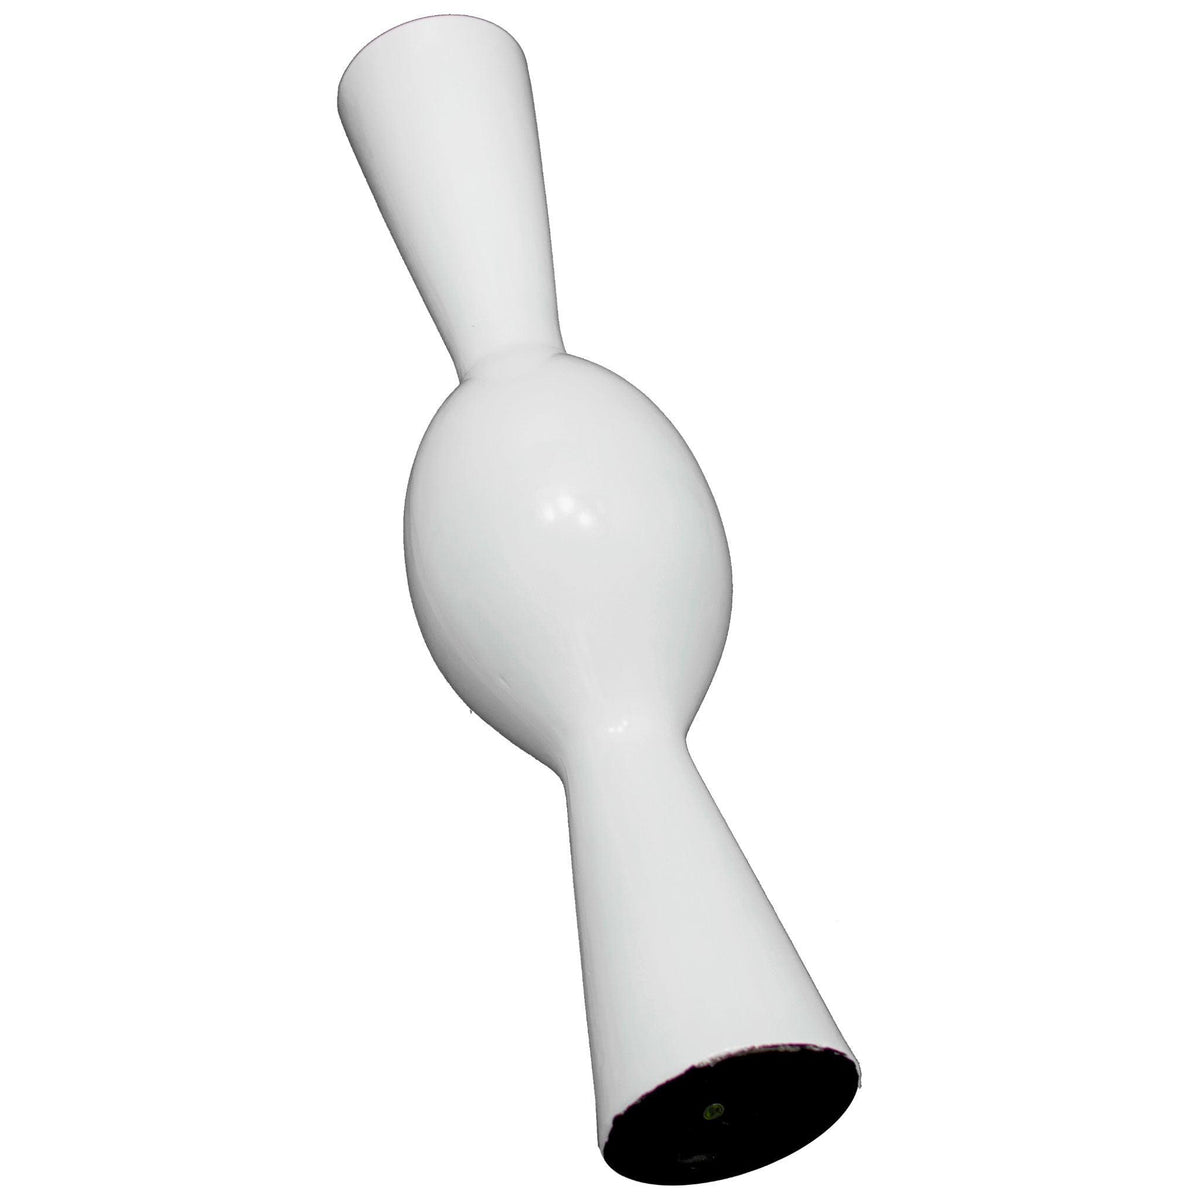 Lee Display's brand new 22in Loutrophoros Ceramic Vase comes in a high gloss white finish on sale at leedisplay.com